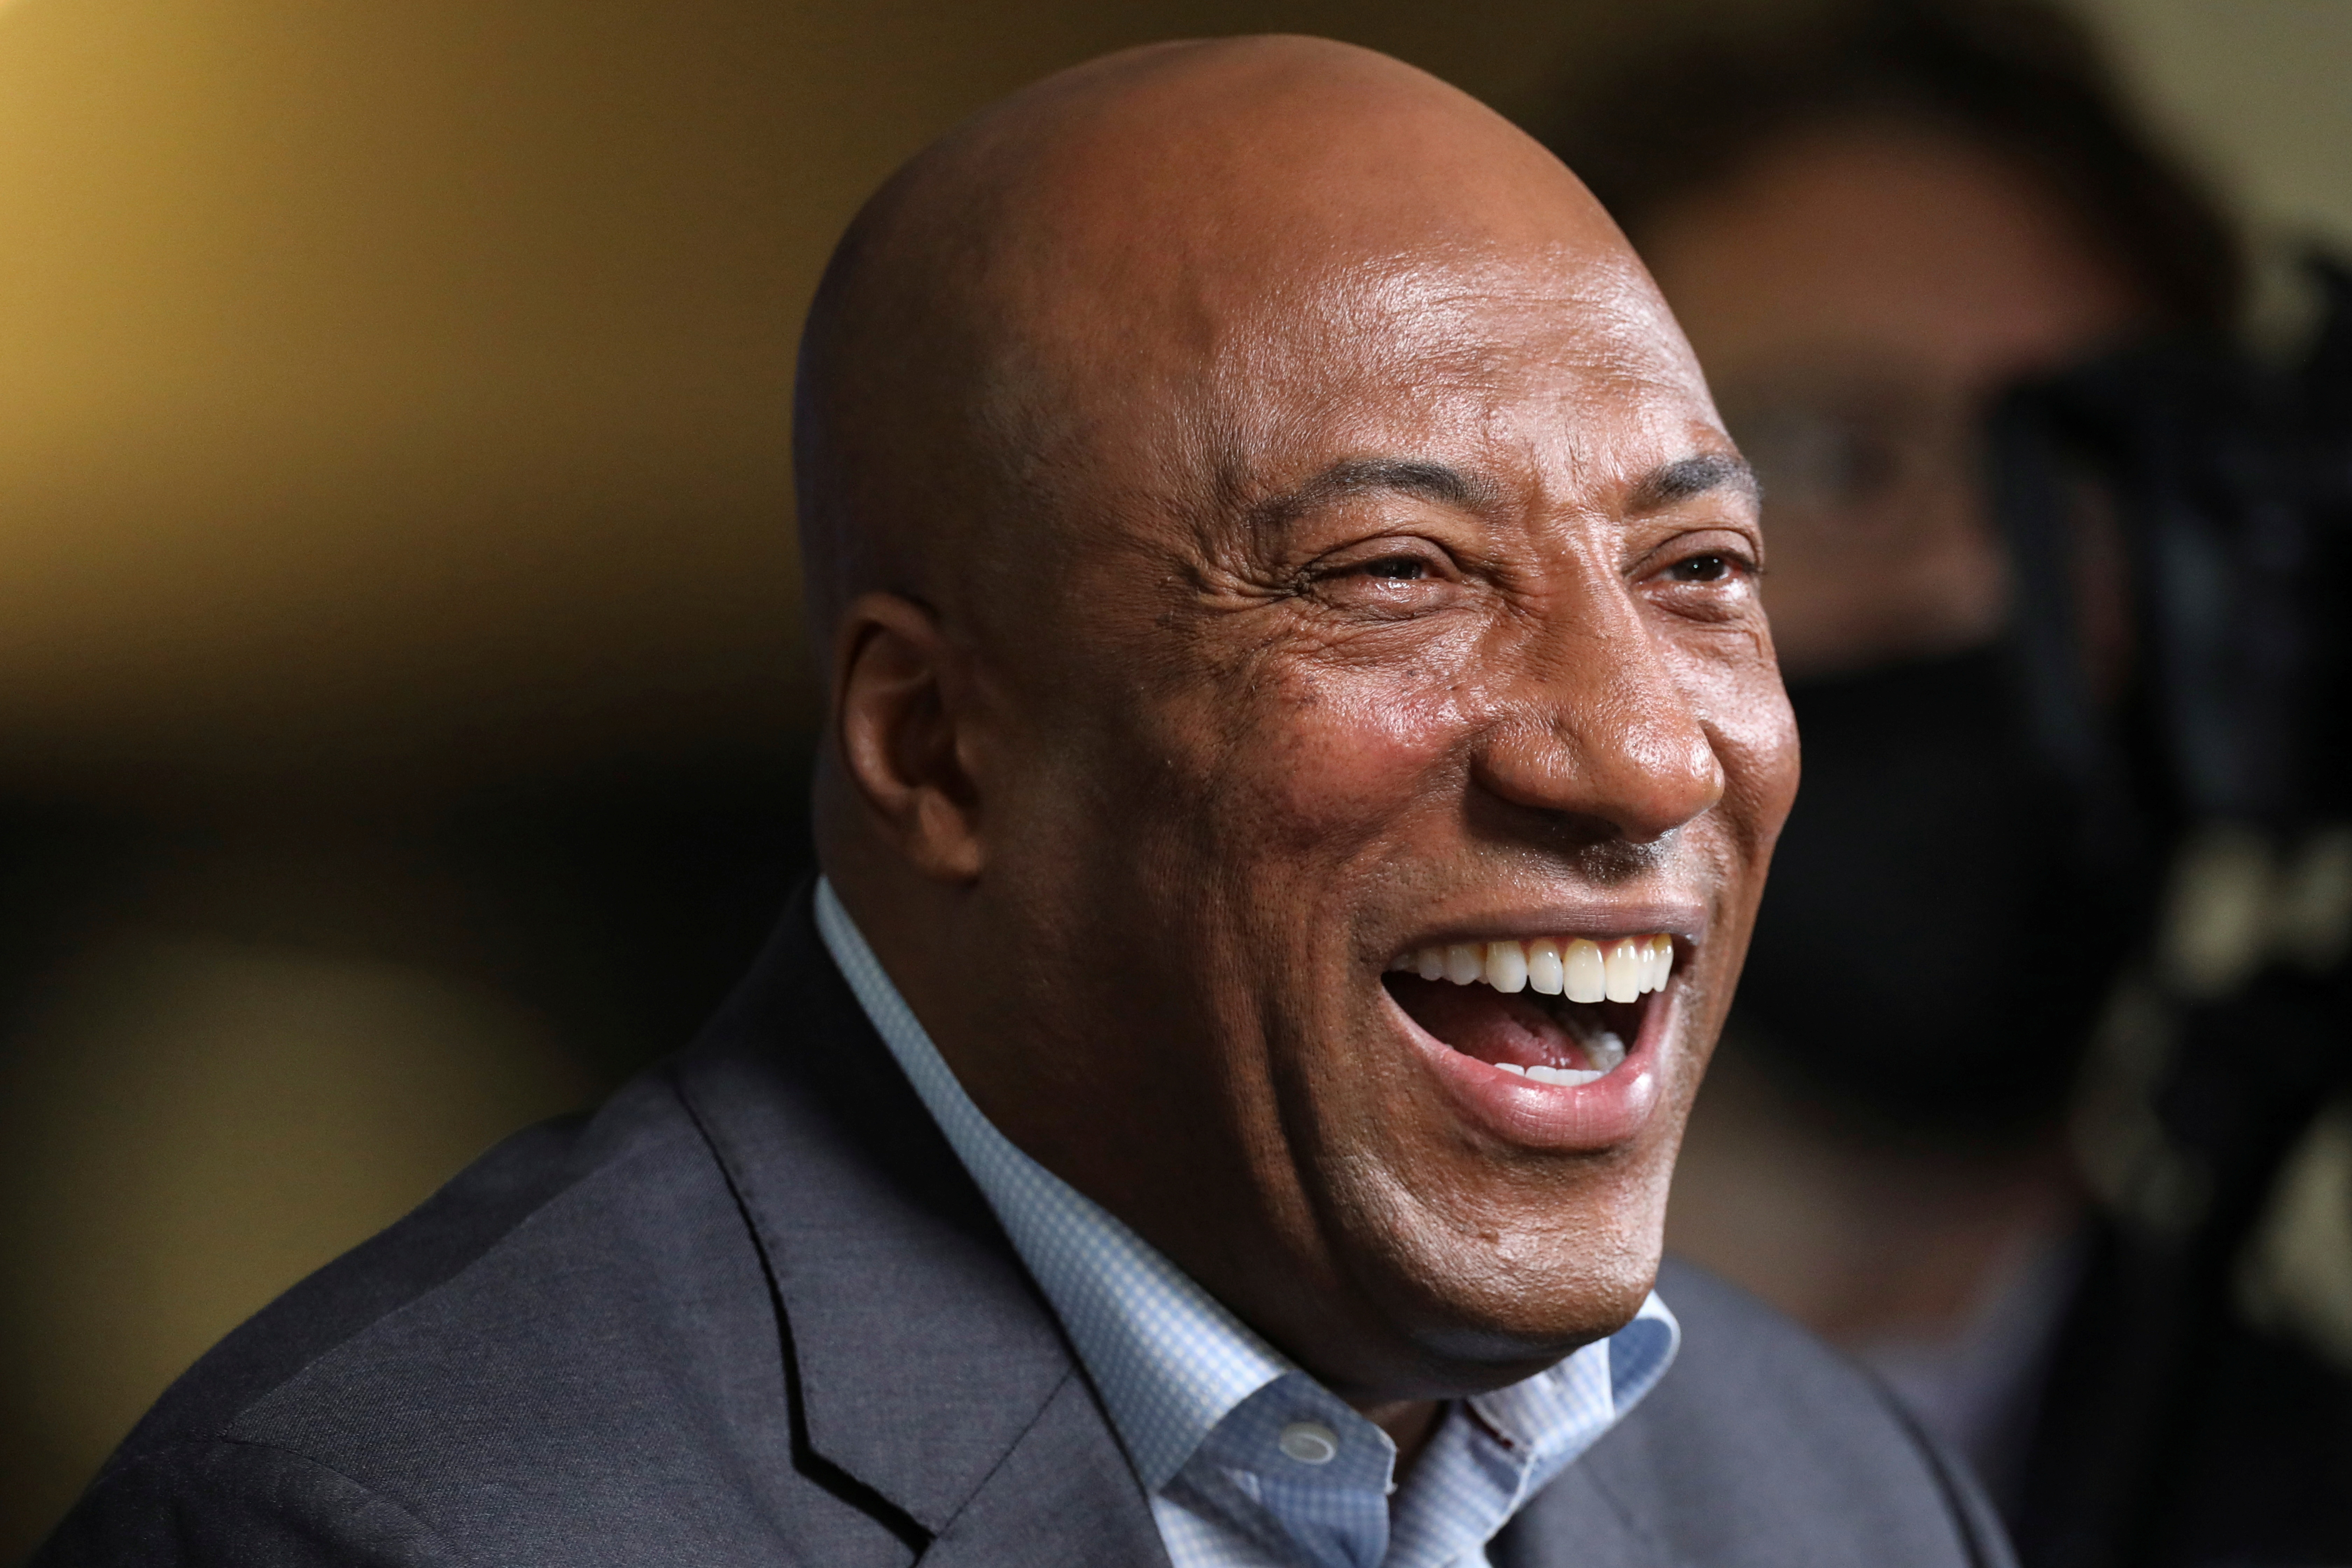 Byron Allen, Founder, Chairman and CEO of Entertainment Studios and Allen Media Group, reacts at the 2021 Milken Institute Global Conference in Beverly Hills, California, U.S., October 19, 2021. REUTERS/David Swanson